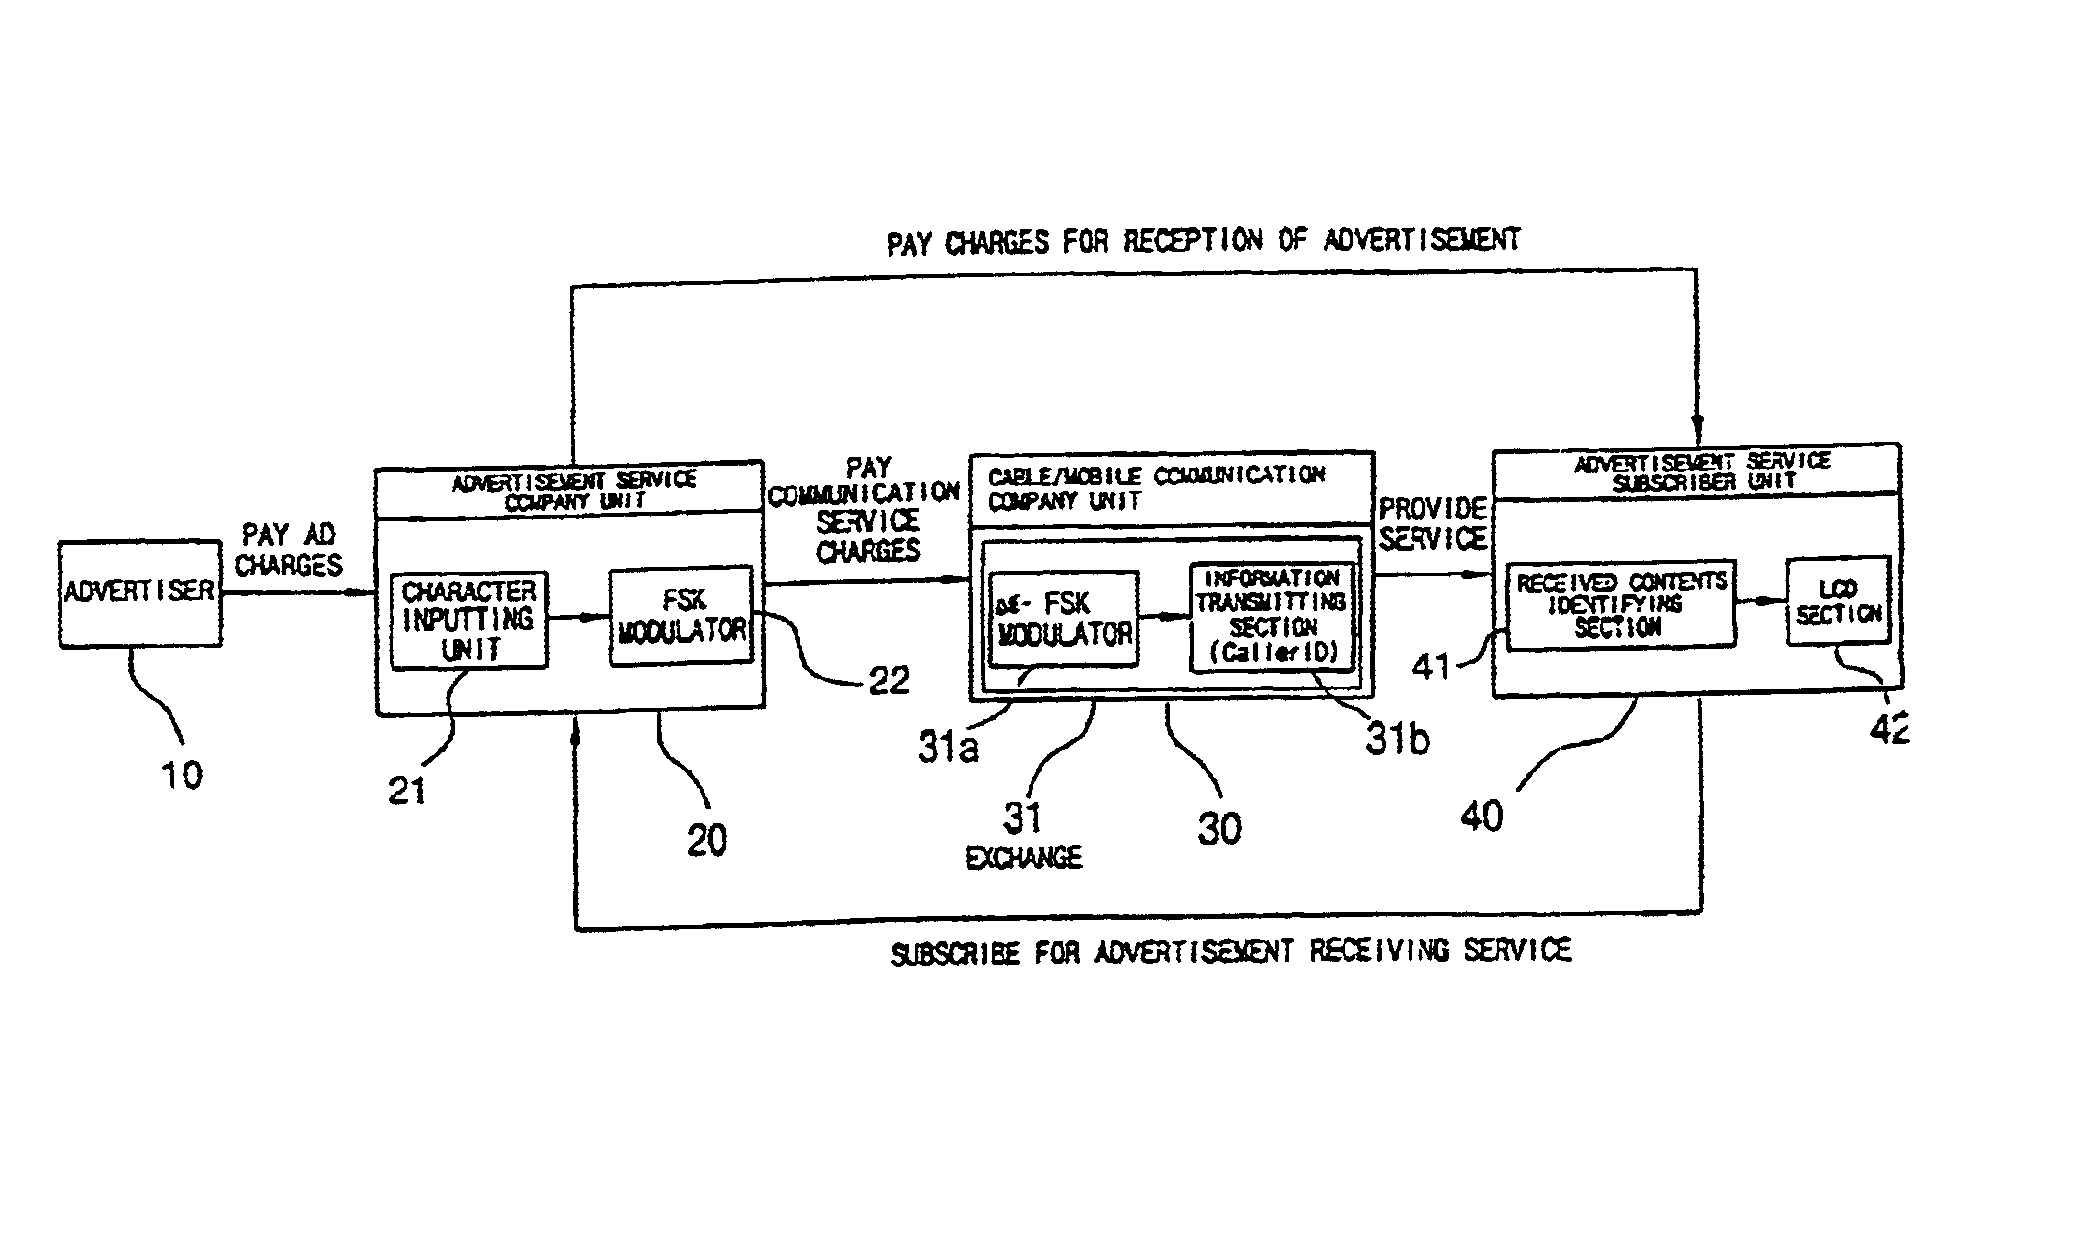 Method and apparatus for transmitting and receiving a message using caller ID